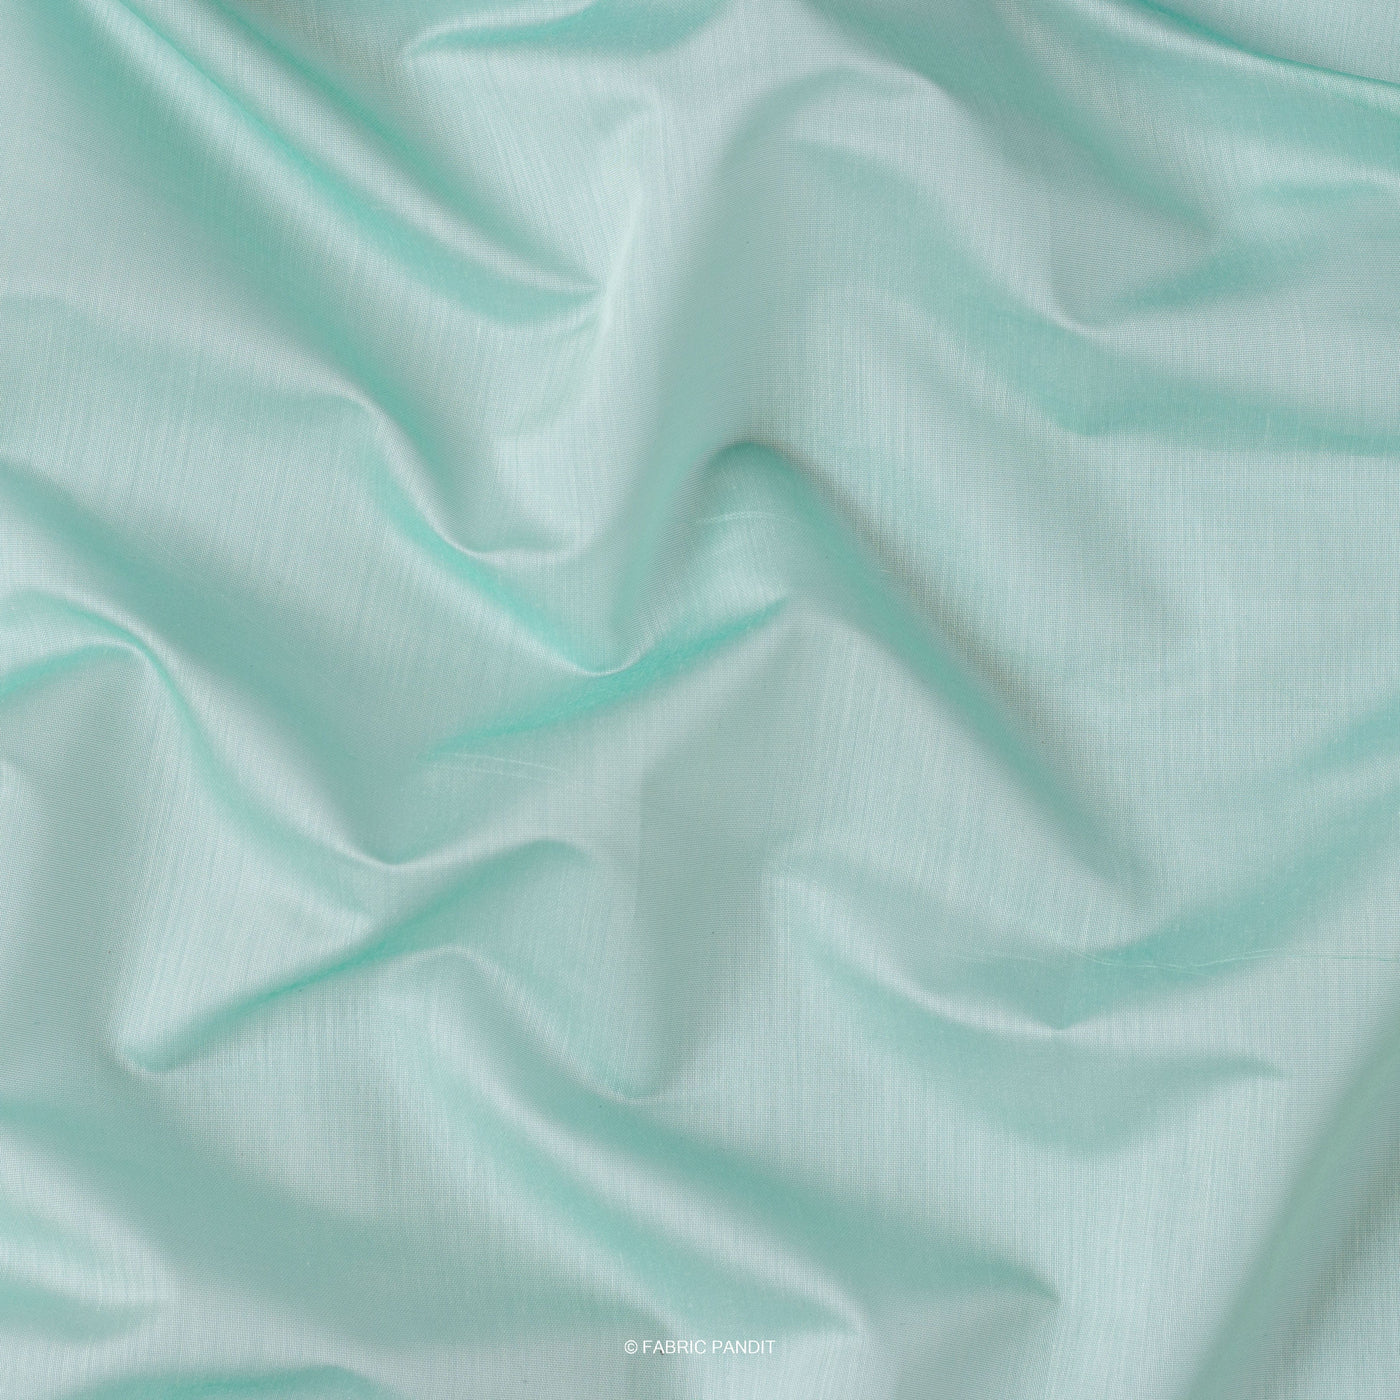 Fabric Pandit Fabric Light Turquoise Color Plain Chanderi Fabric (Width 43 Inches)